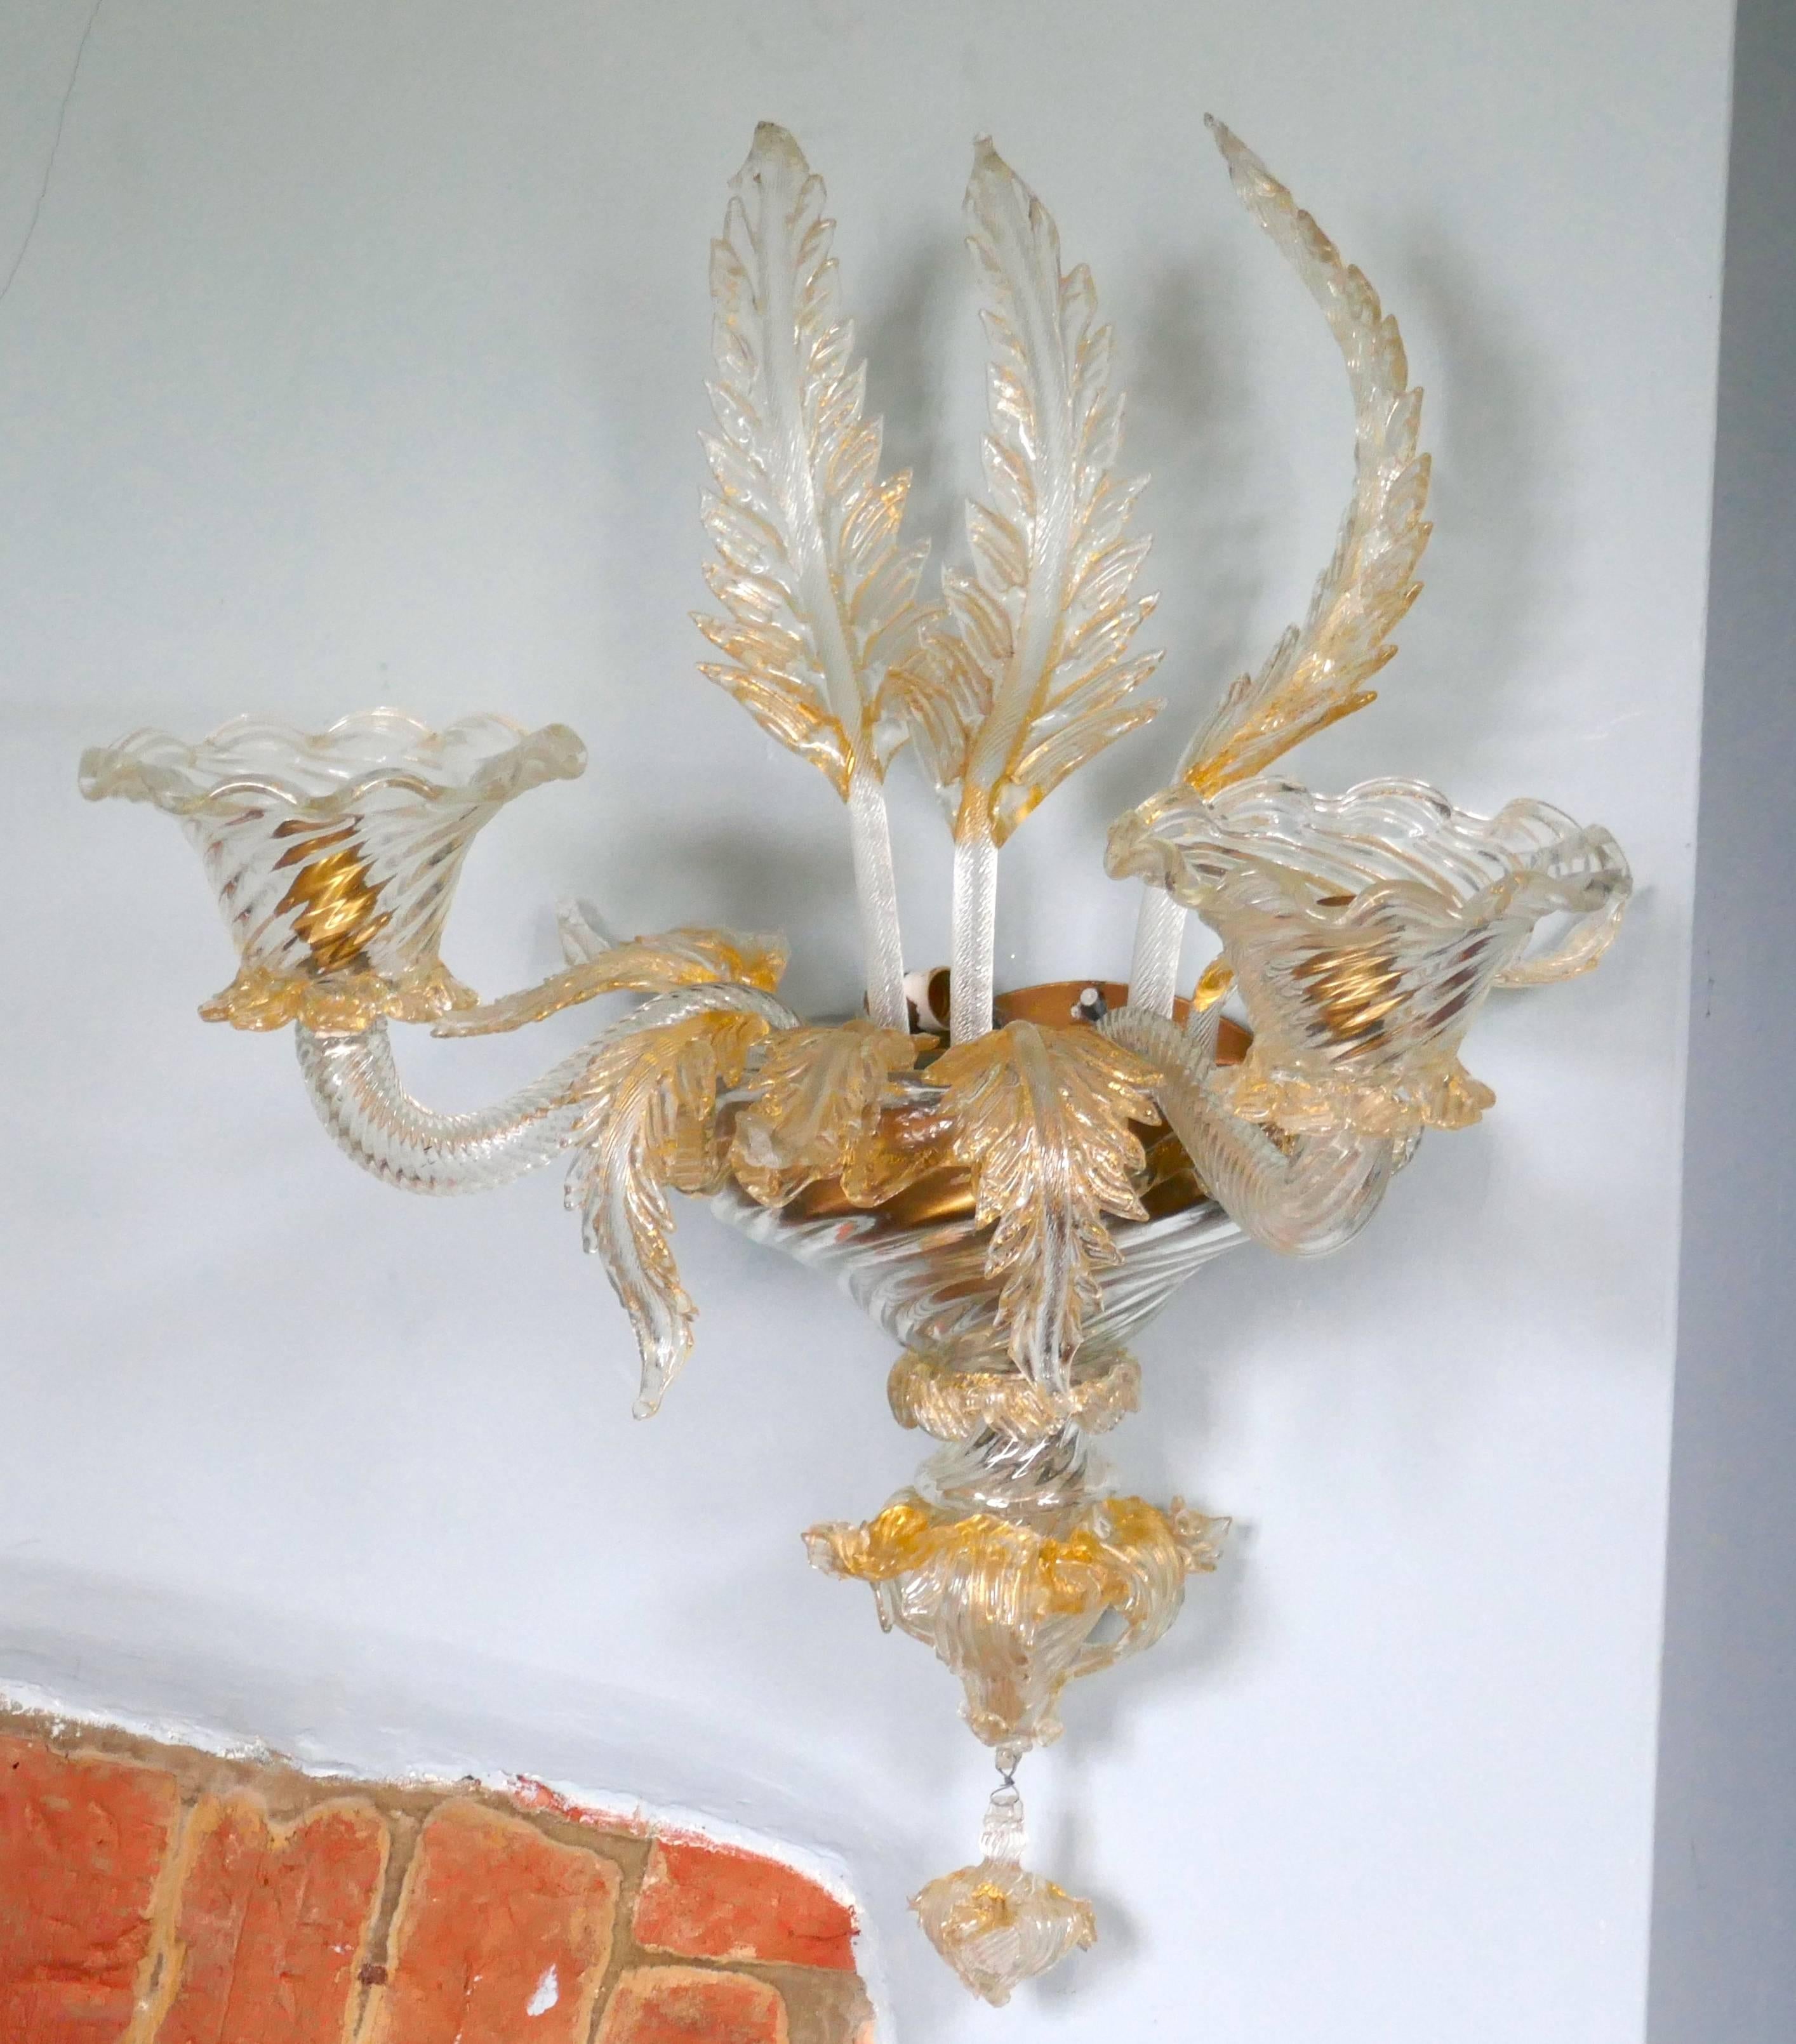 Pair of Superb Venetian Glass and Gilt Chandelier Wall Lights

A truly rare and outstanding pair of wall lights, the lights are hand made in Venetian glass and highlighted with gold
The lights are large and are each lit by three-light bulbs, one